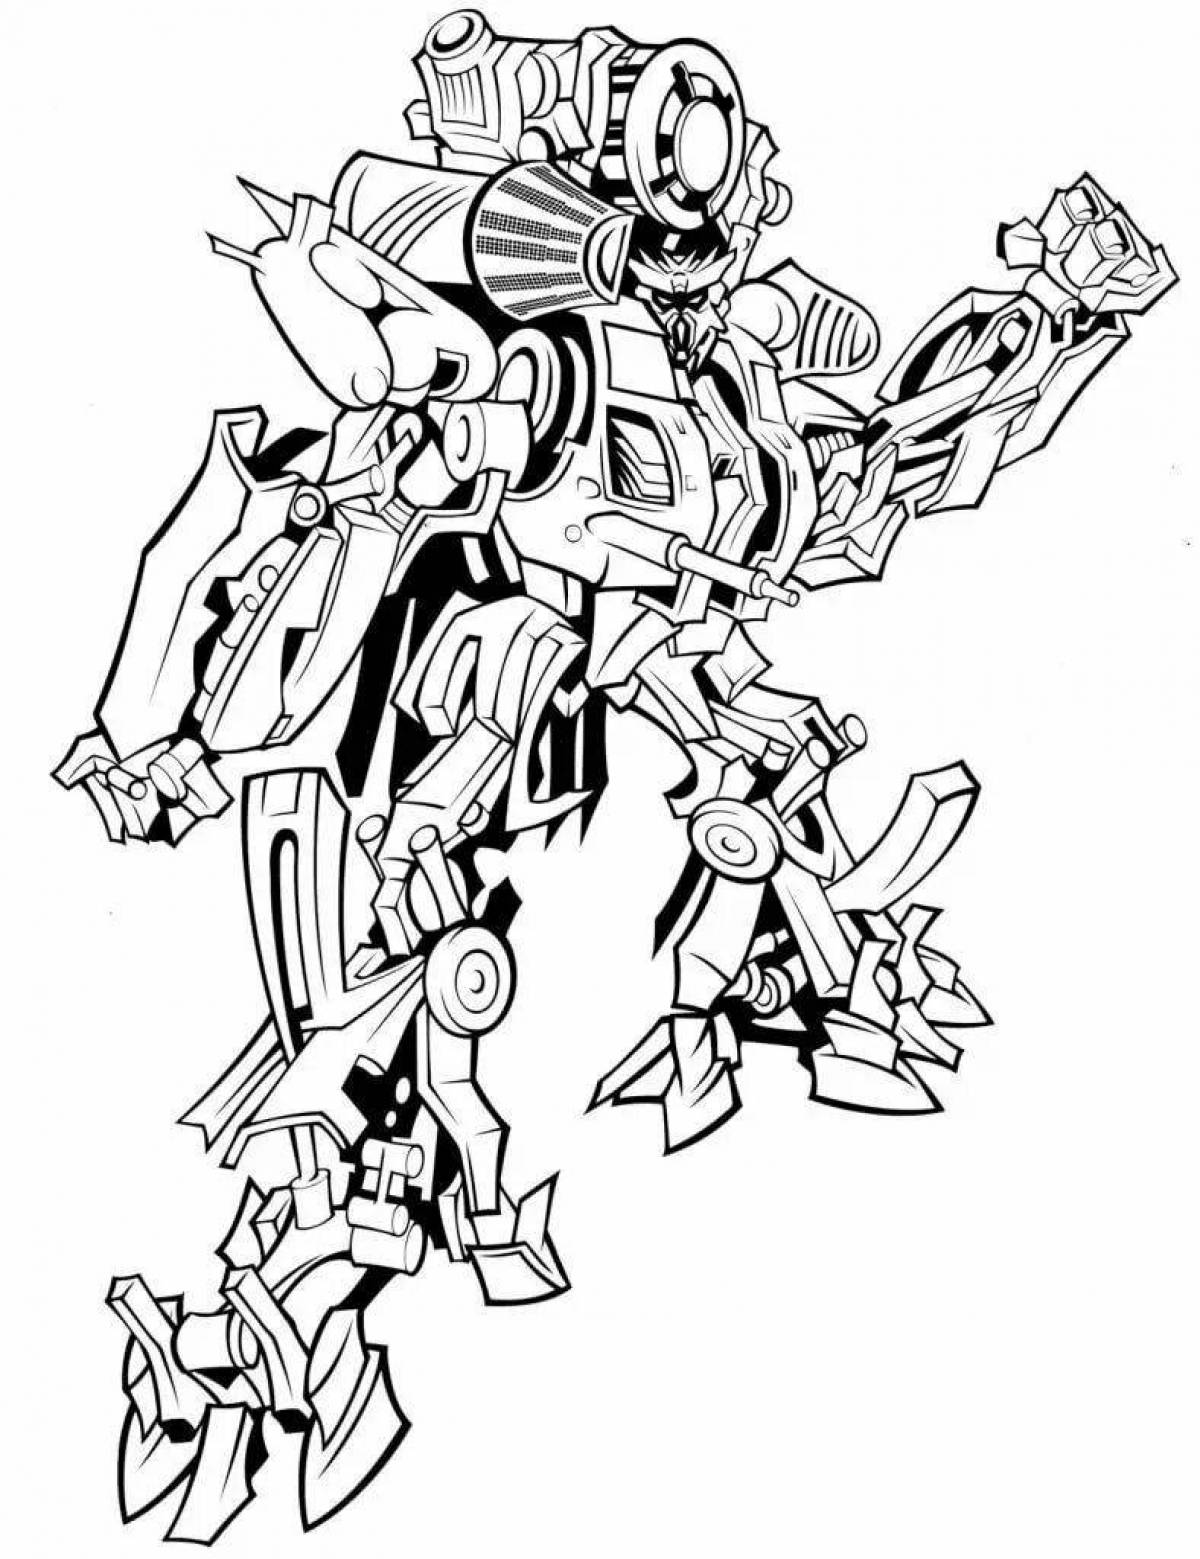 Amazing ironhide coloring page